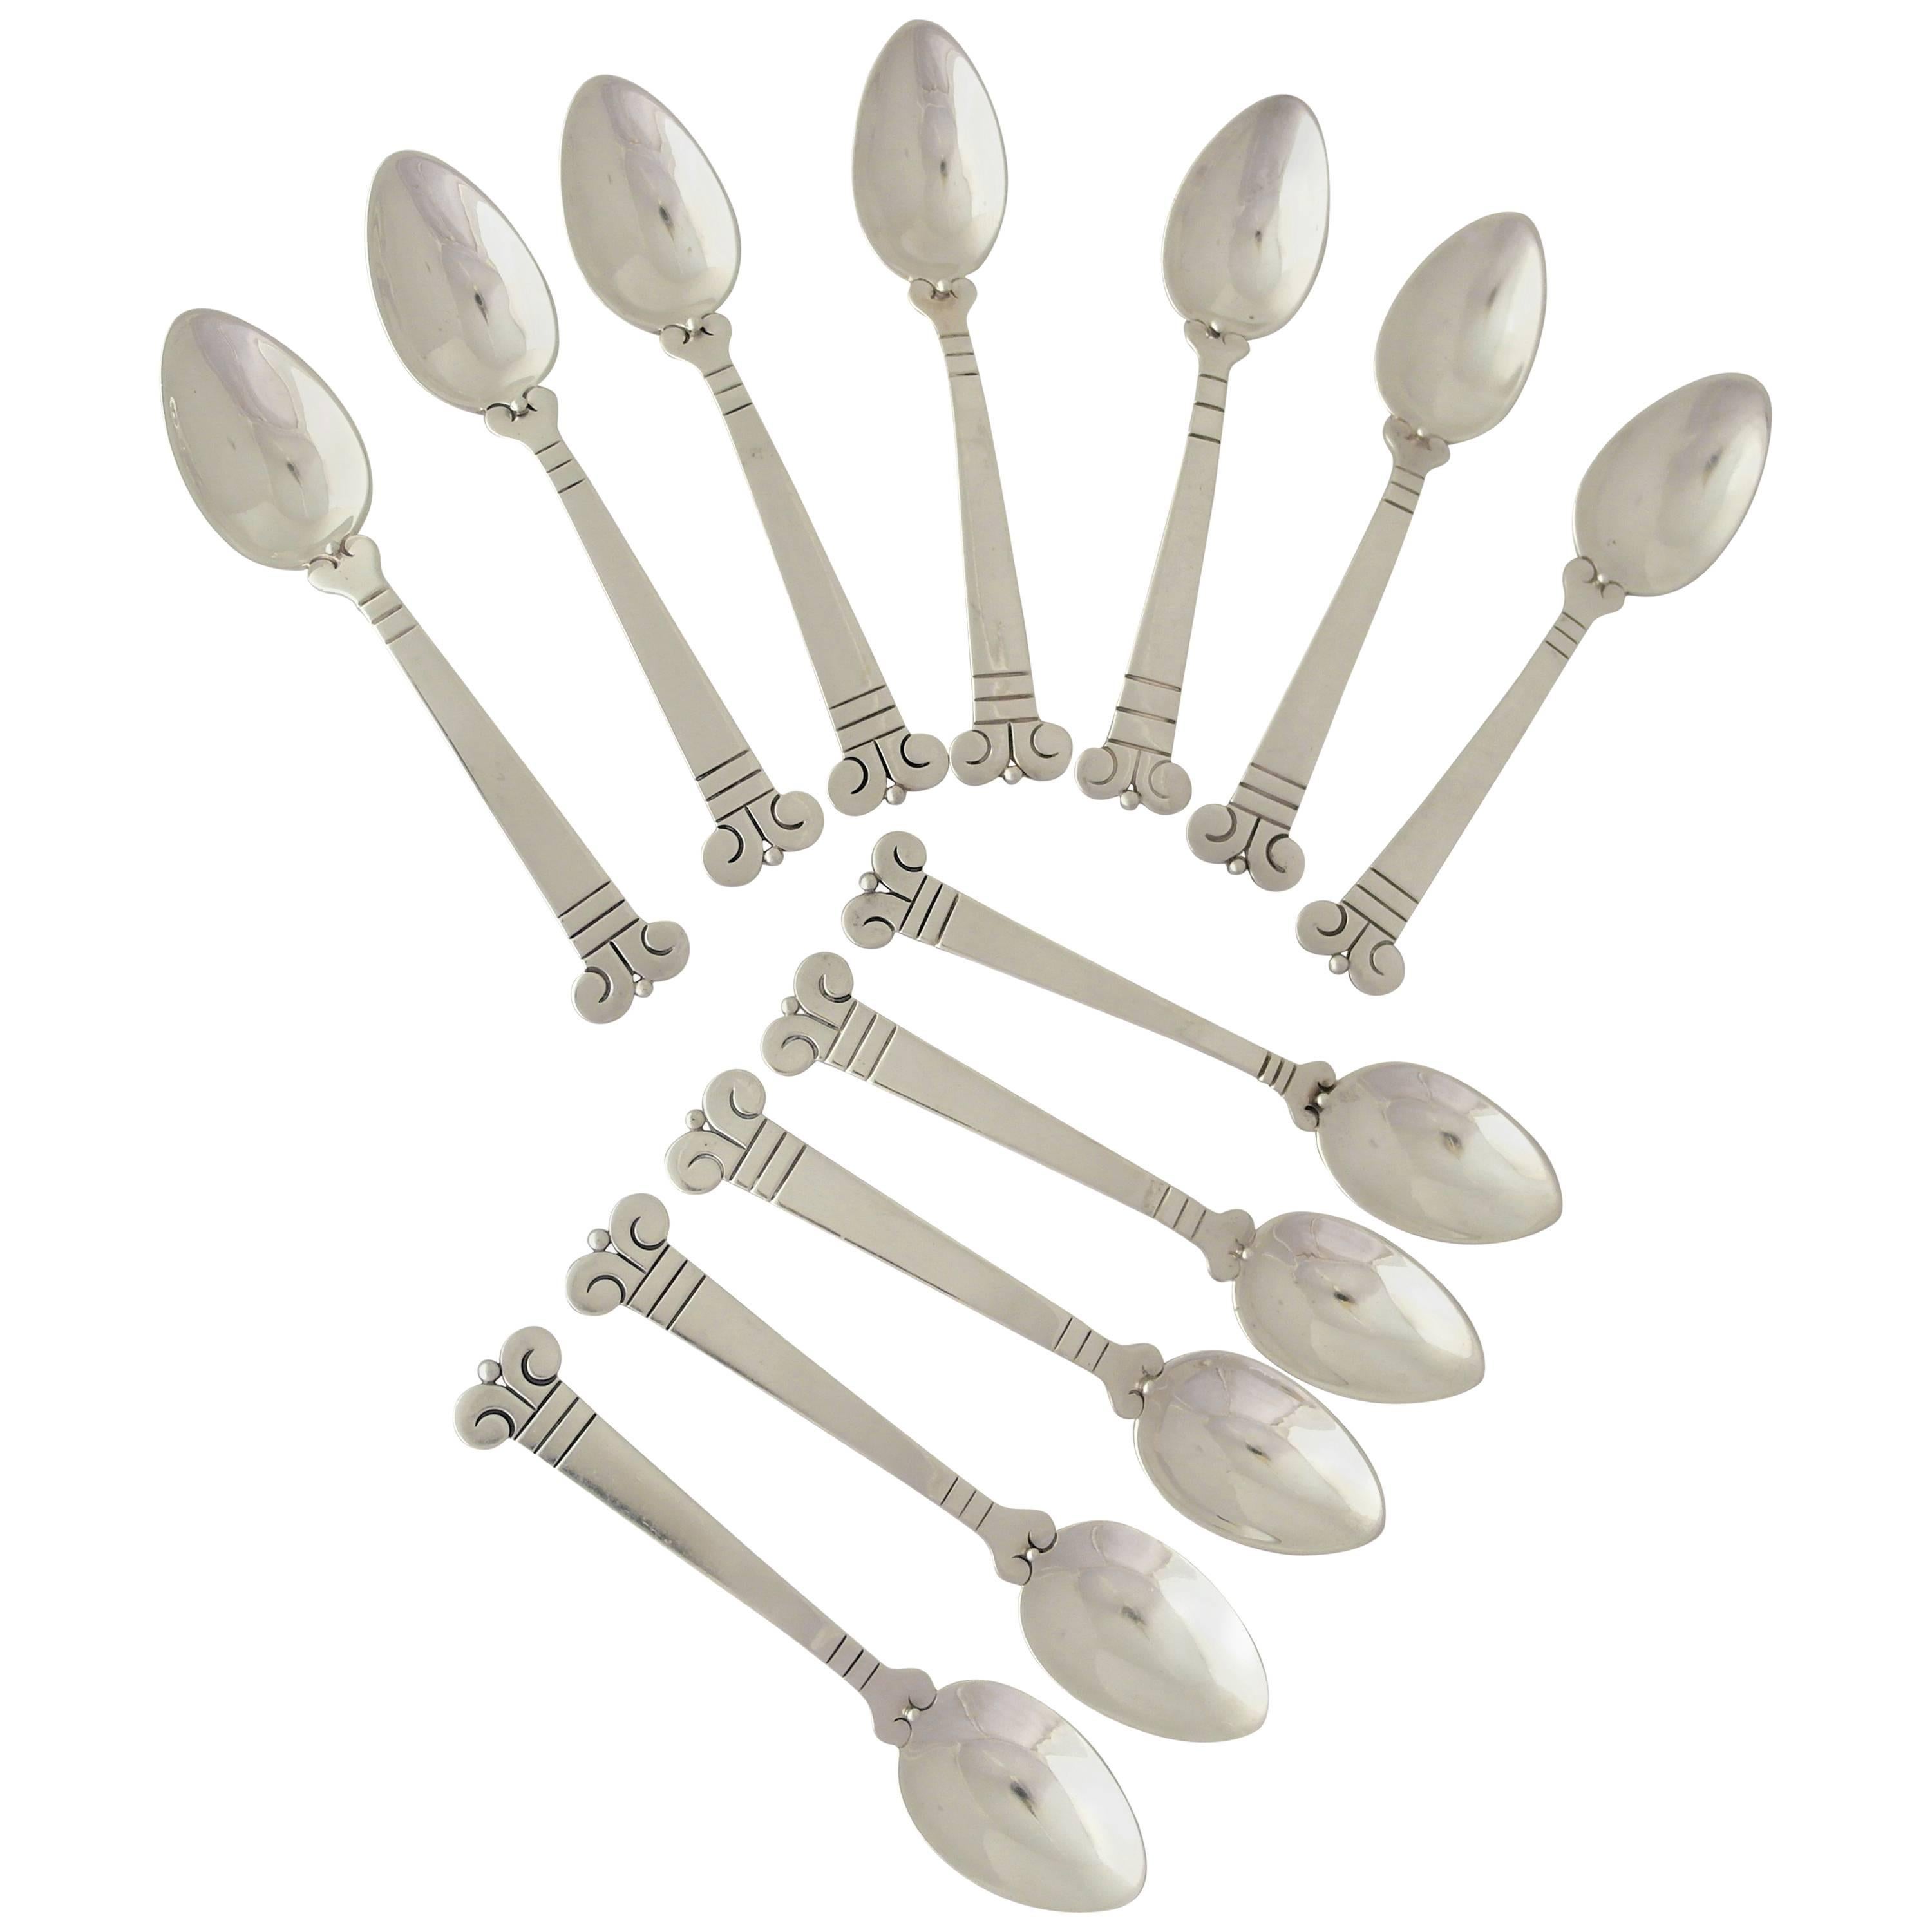 Hector Aguilar Aztec Pattern Set of 12 Spoons For Sale